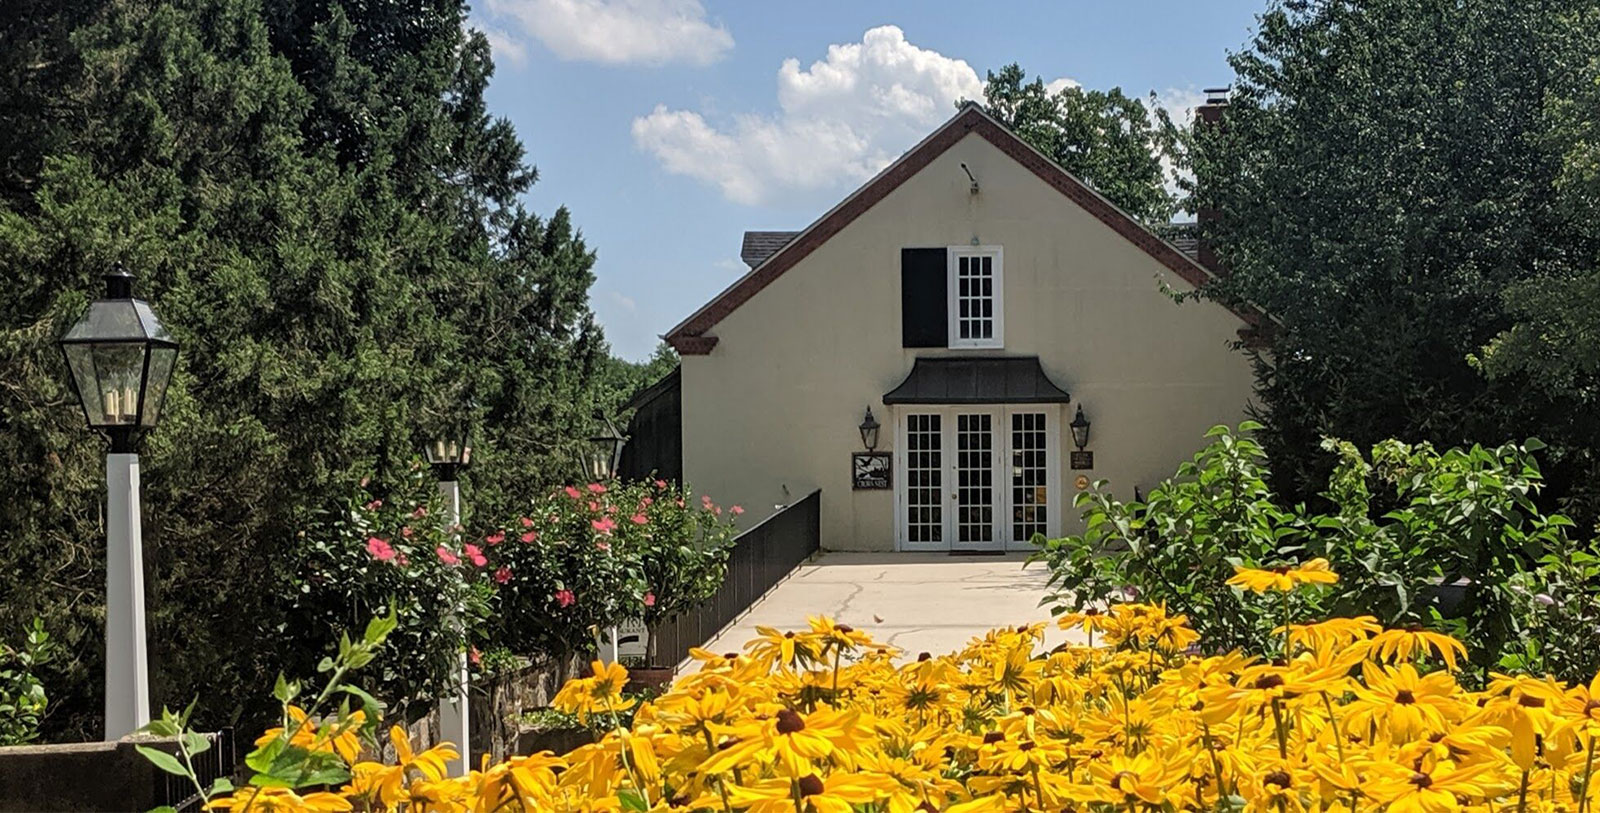 Image of Exterior with Yellow Flowers The Inn at Montchanin Village, 1799, Member of Historic Hotels of America, in Montchanin, Delaware, History